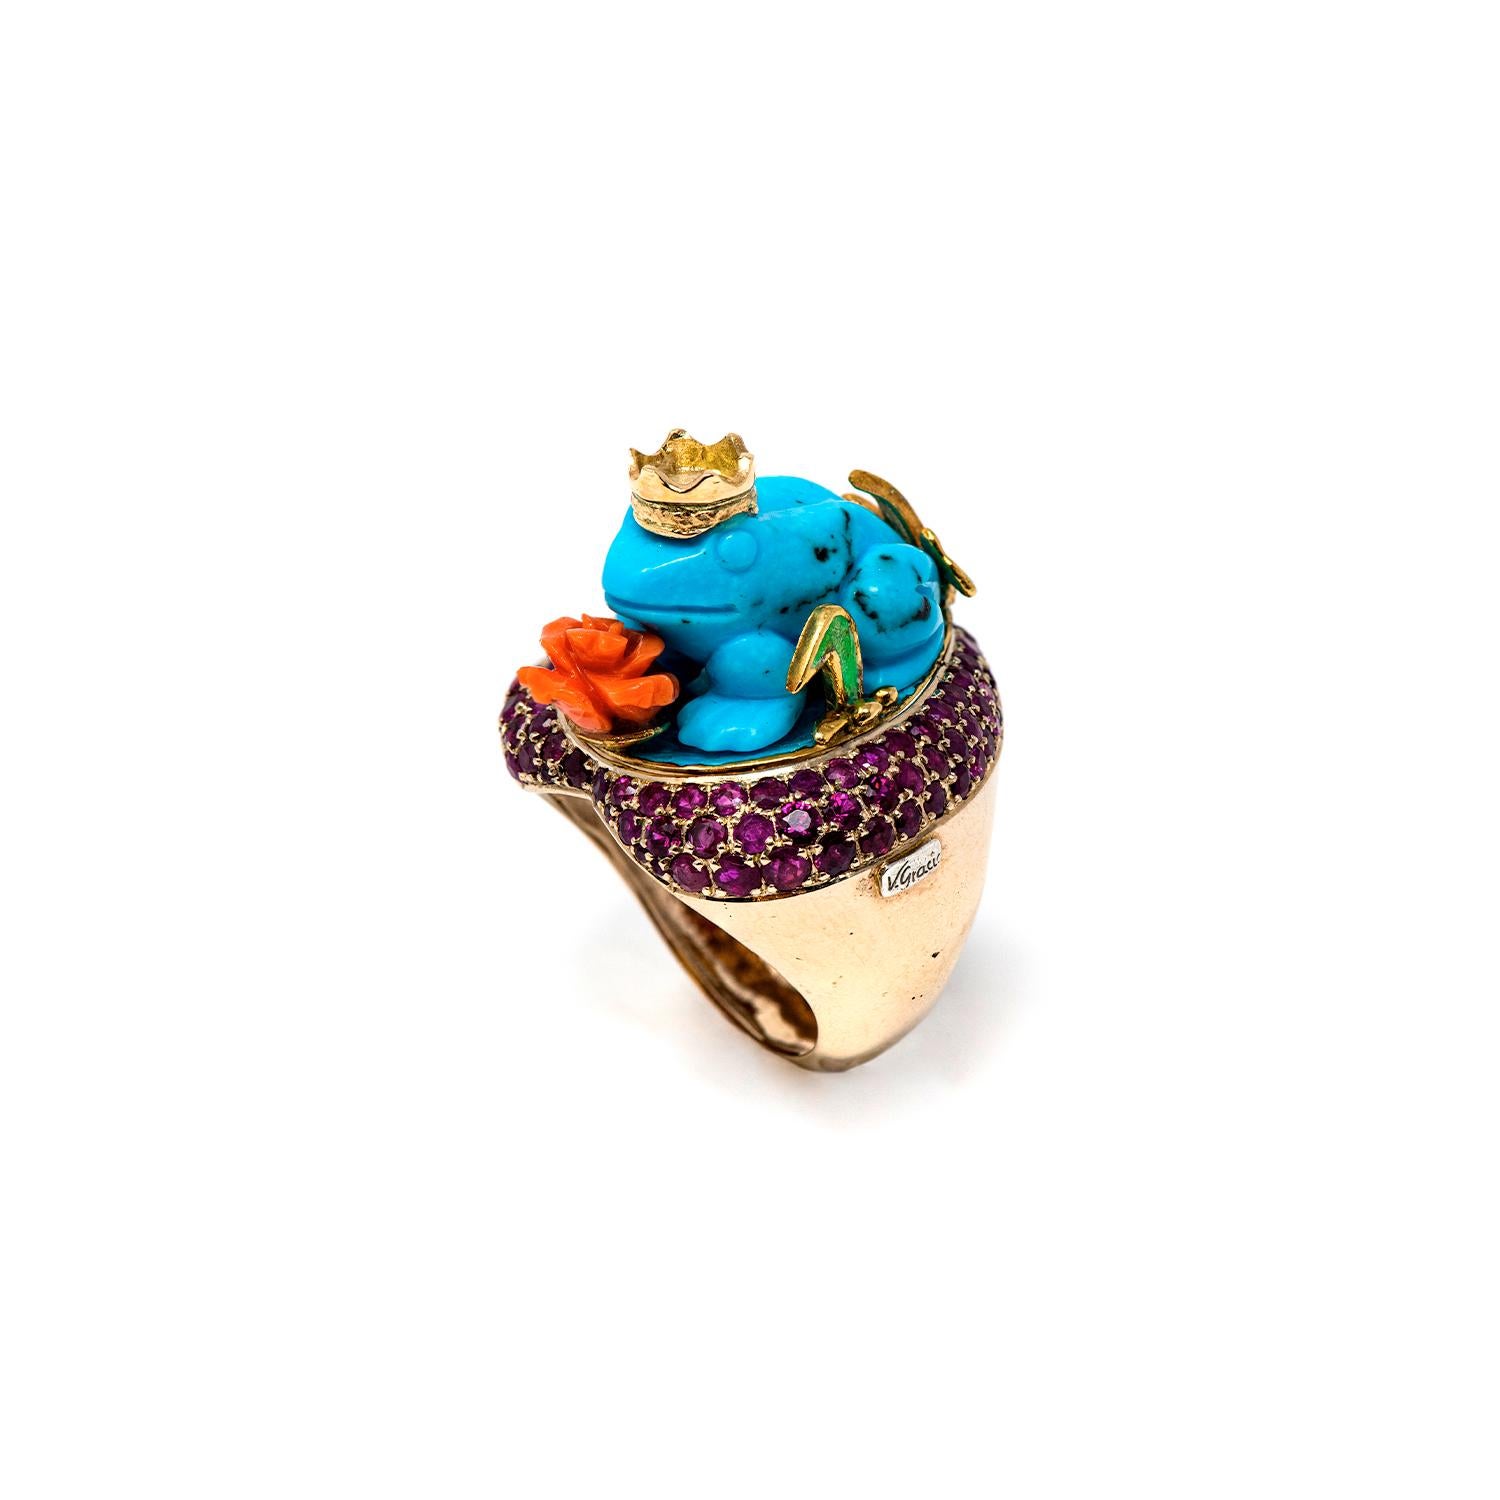 2.65 Carat Rubies, 3.5 grams Blue Turquoise Red Coral Heart White Gold Cocktail Ring 

White Gold Ring in shape of a Heart with 2.65 Carat rubies, with a 3.5 grams Blue Turquoise carved as a Frog representing the enchanted price with his crown in 18